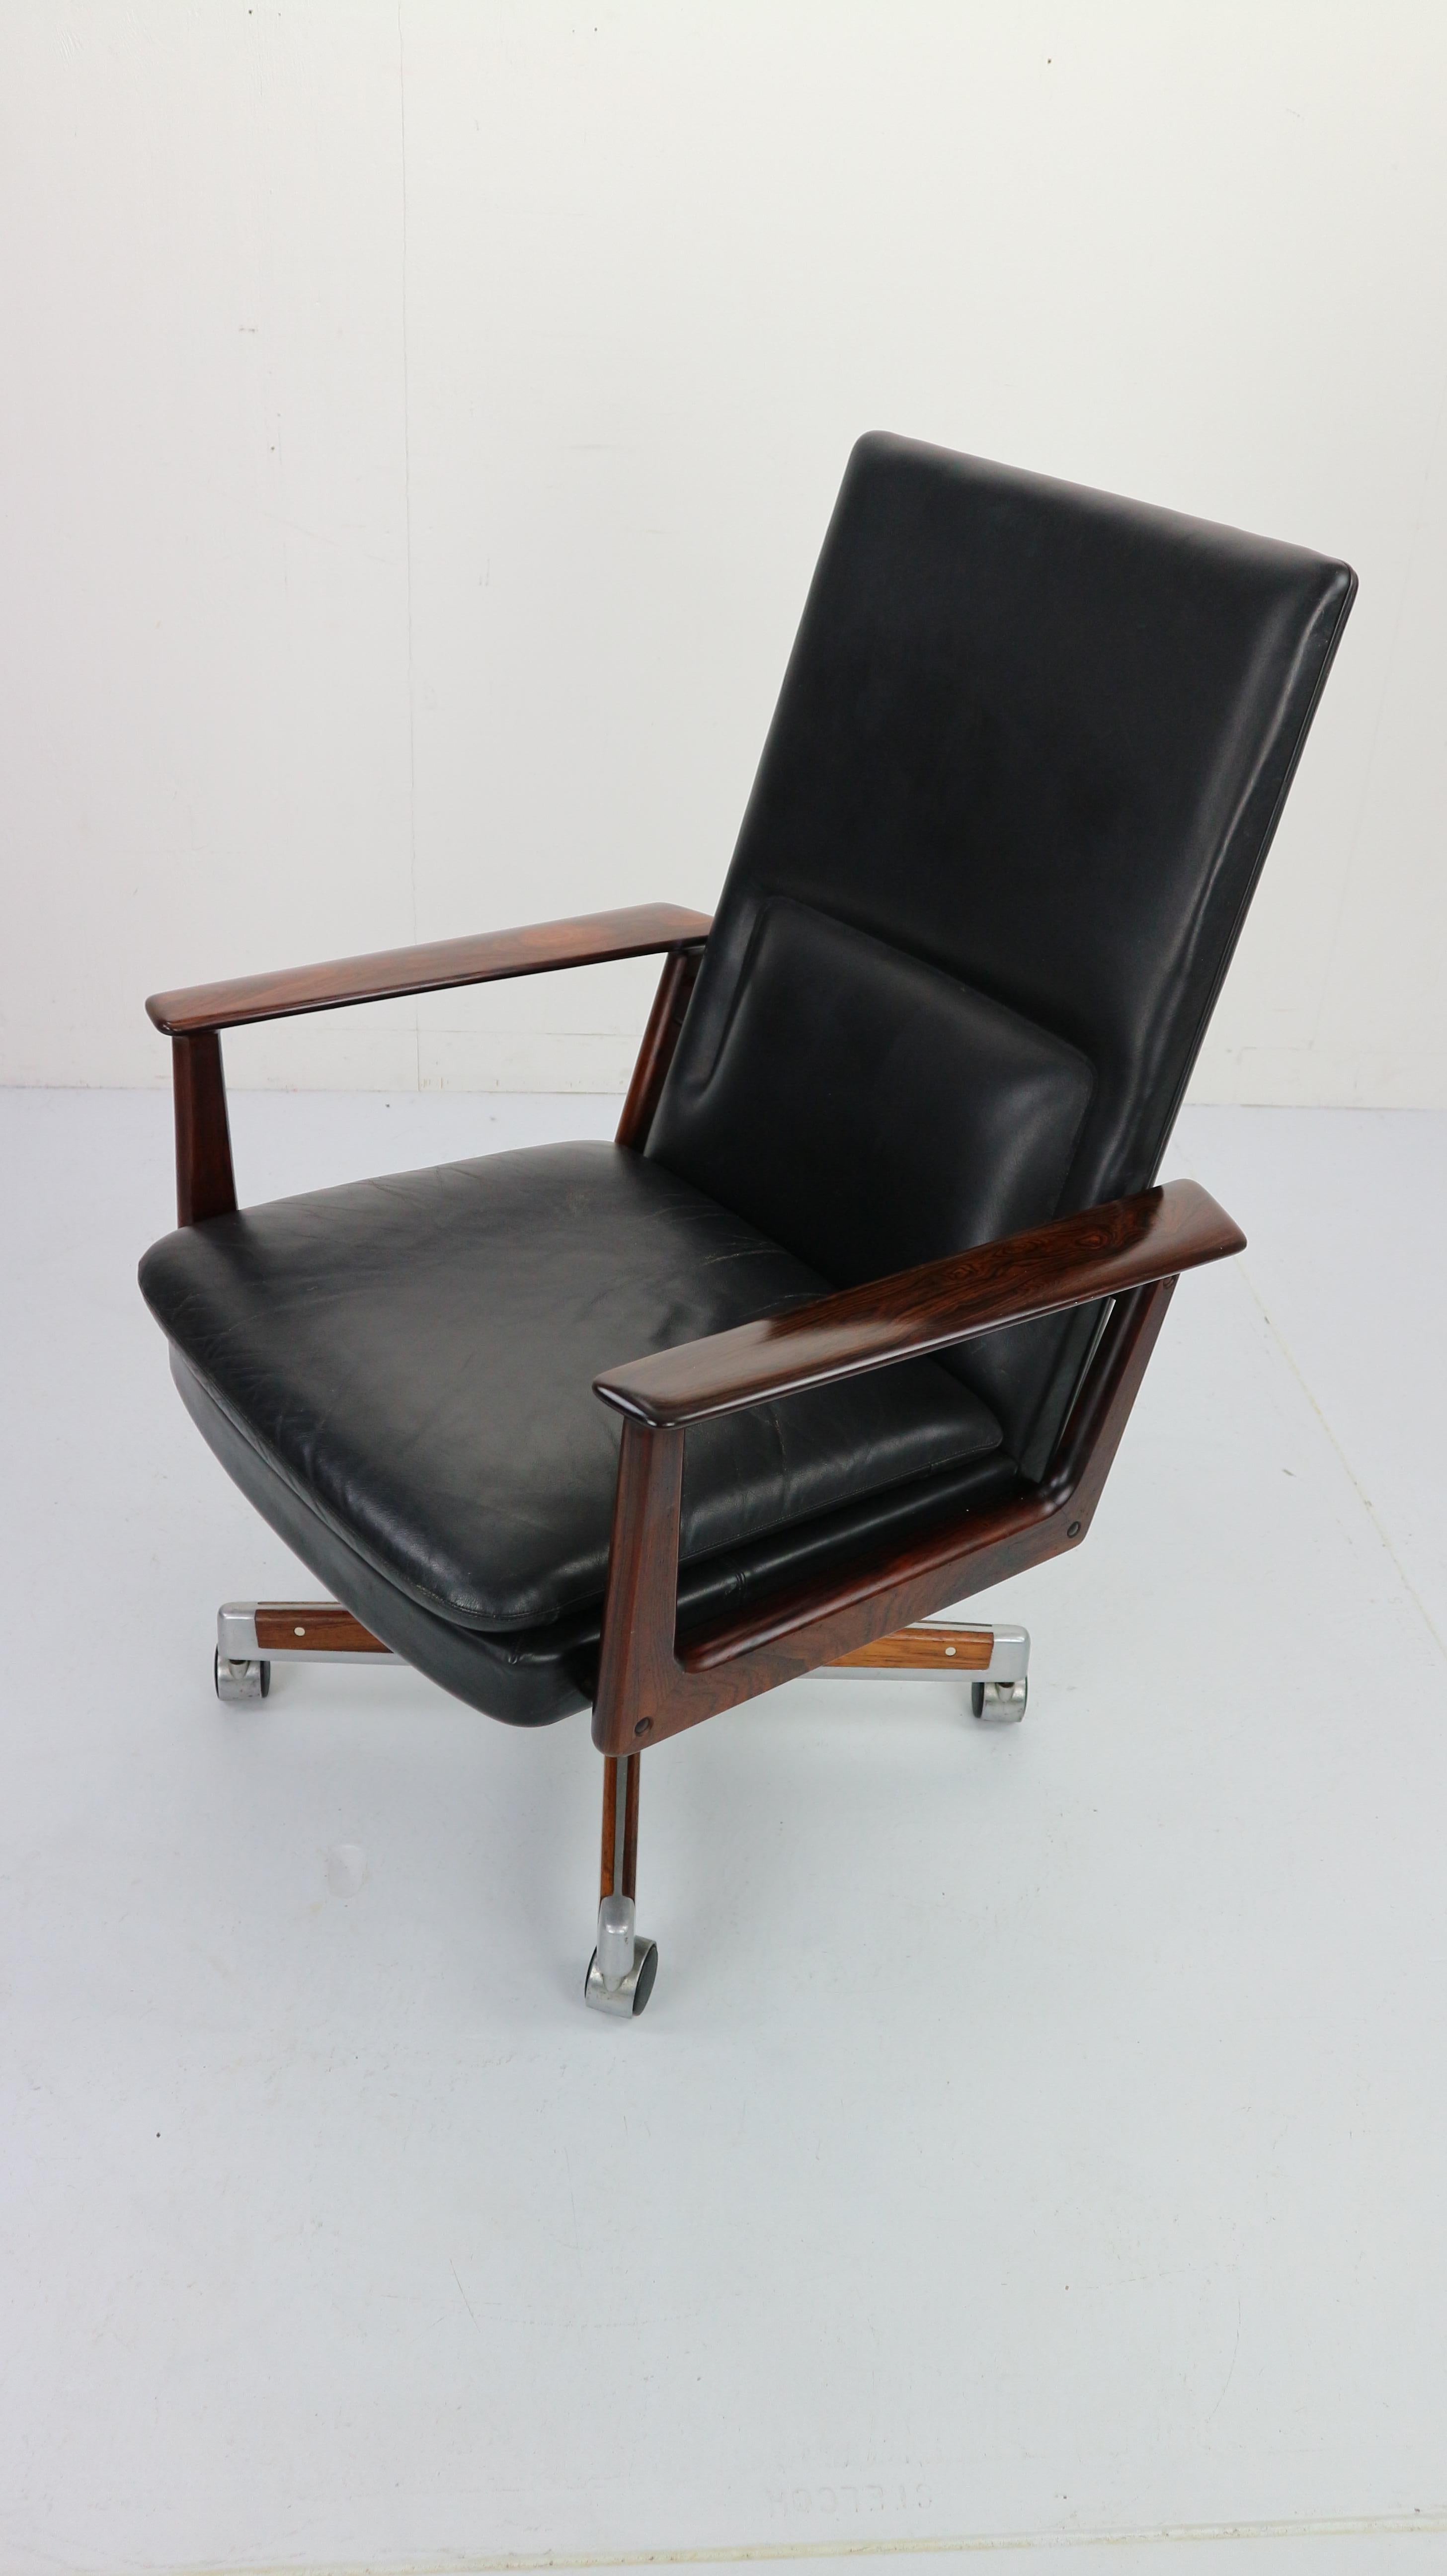 Mid-20th Century Rosewood& Leather Executive Office Chair by Arne Vodder for Sibast, 1960 Denmark